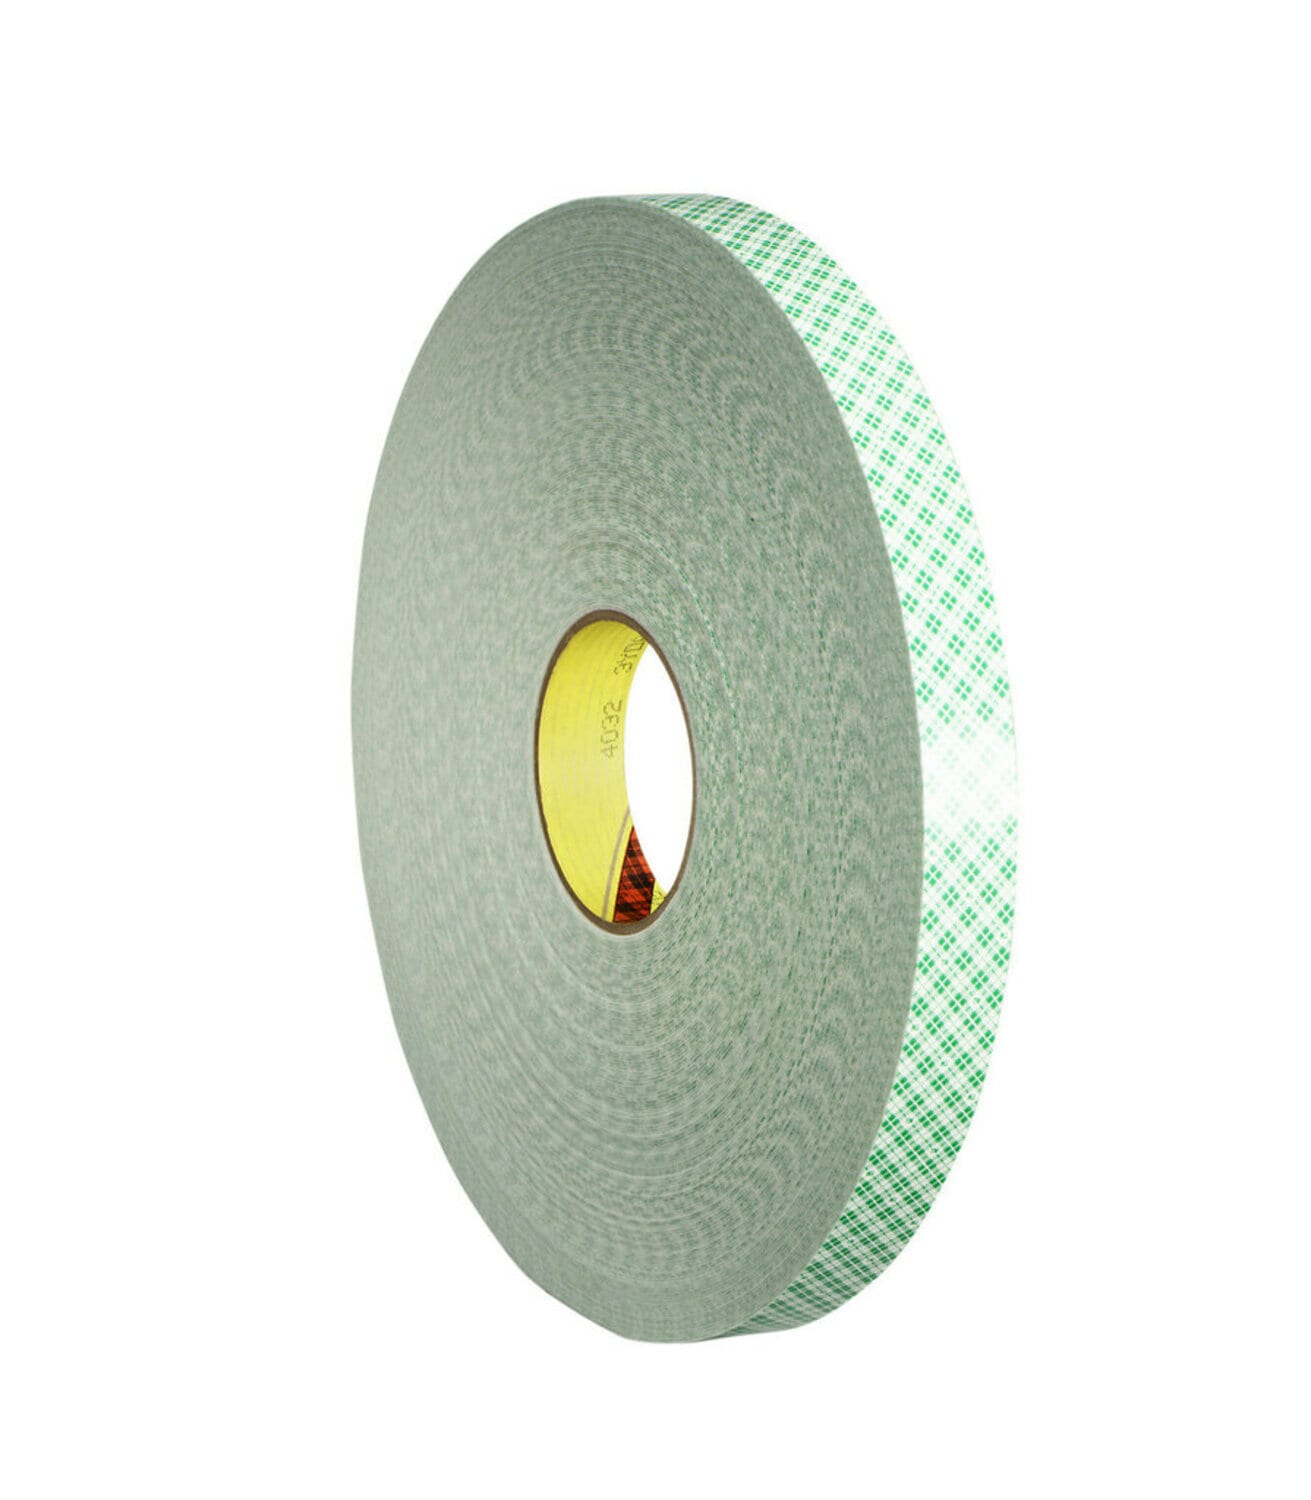 7000048486 - 3M Double Coated Urethane Foam Tape 4032, Off White, 1 in x 72 yd, 31
mil, 9 Rolls/Case